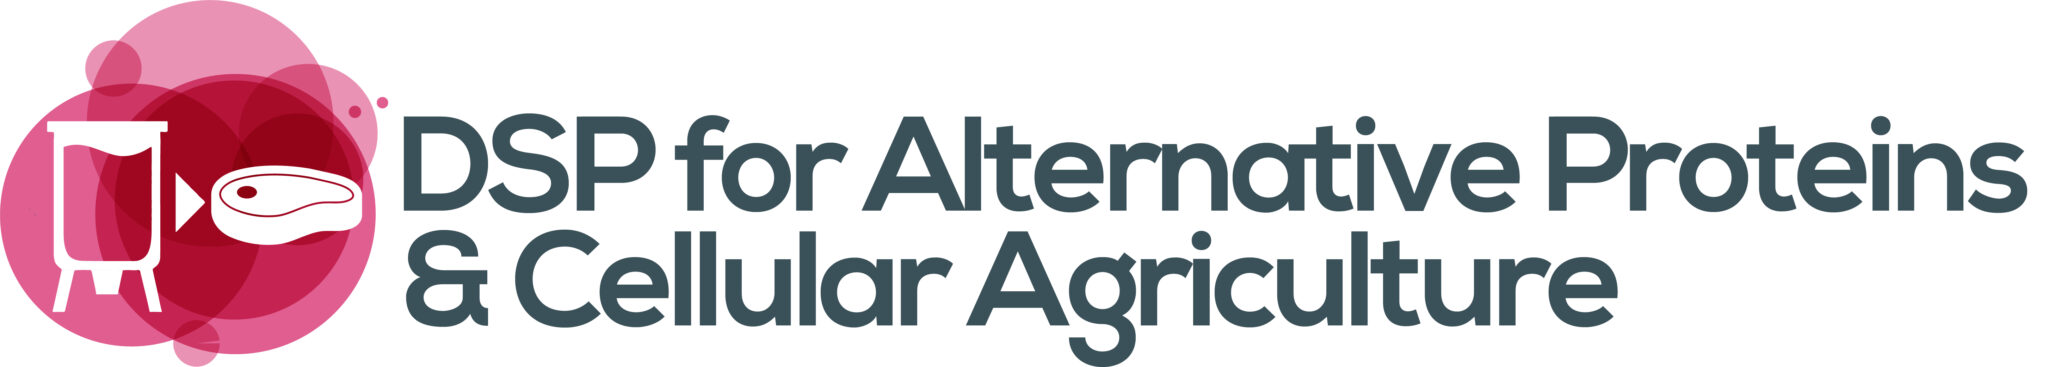 DSP for Alternative Proteins & Cellular Agriculture Logo